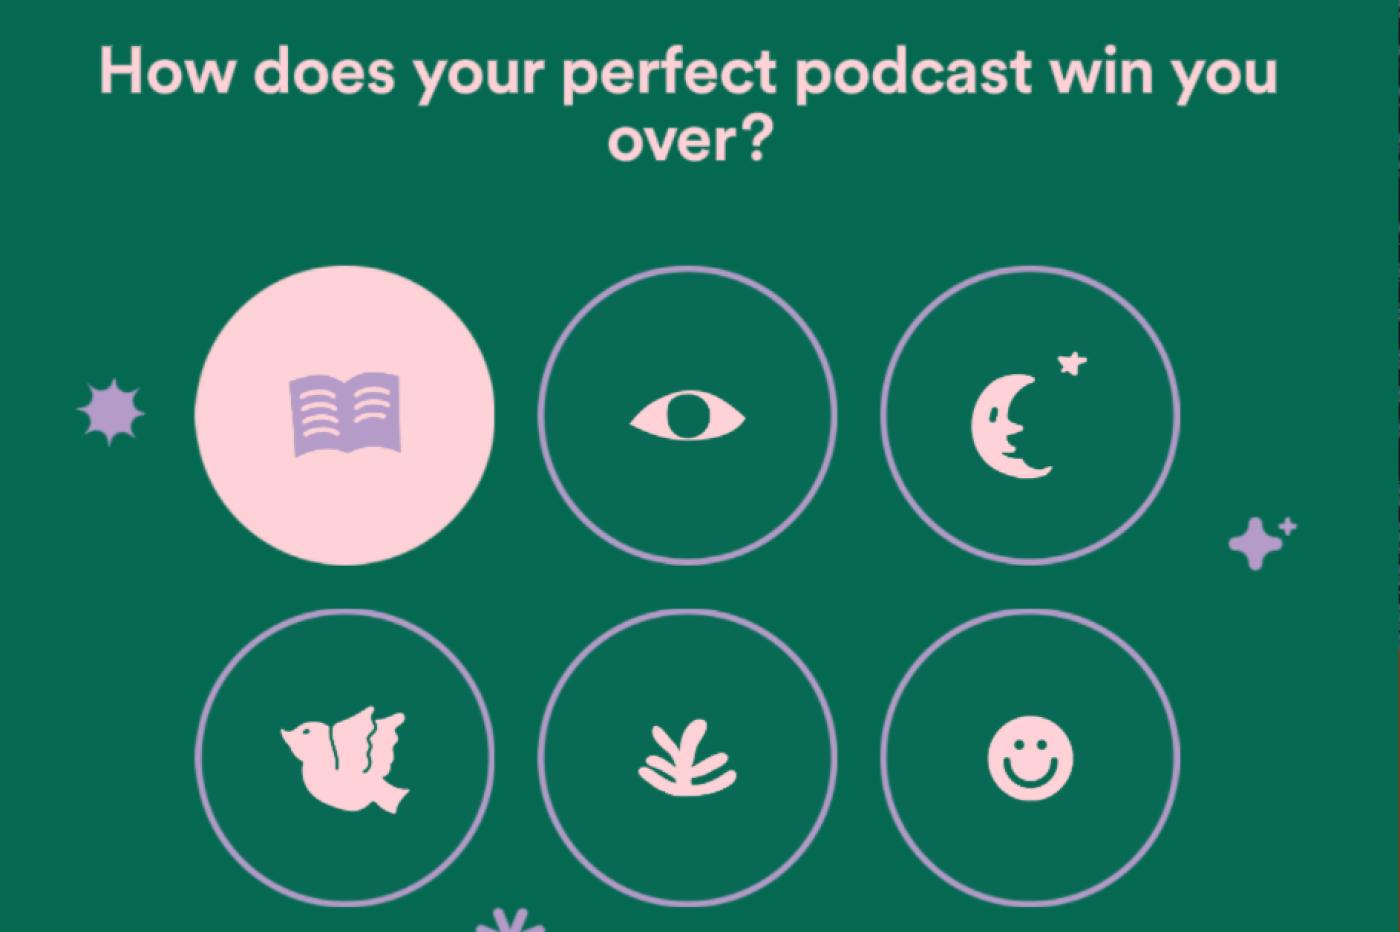 Spotify Find the one question